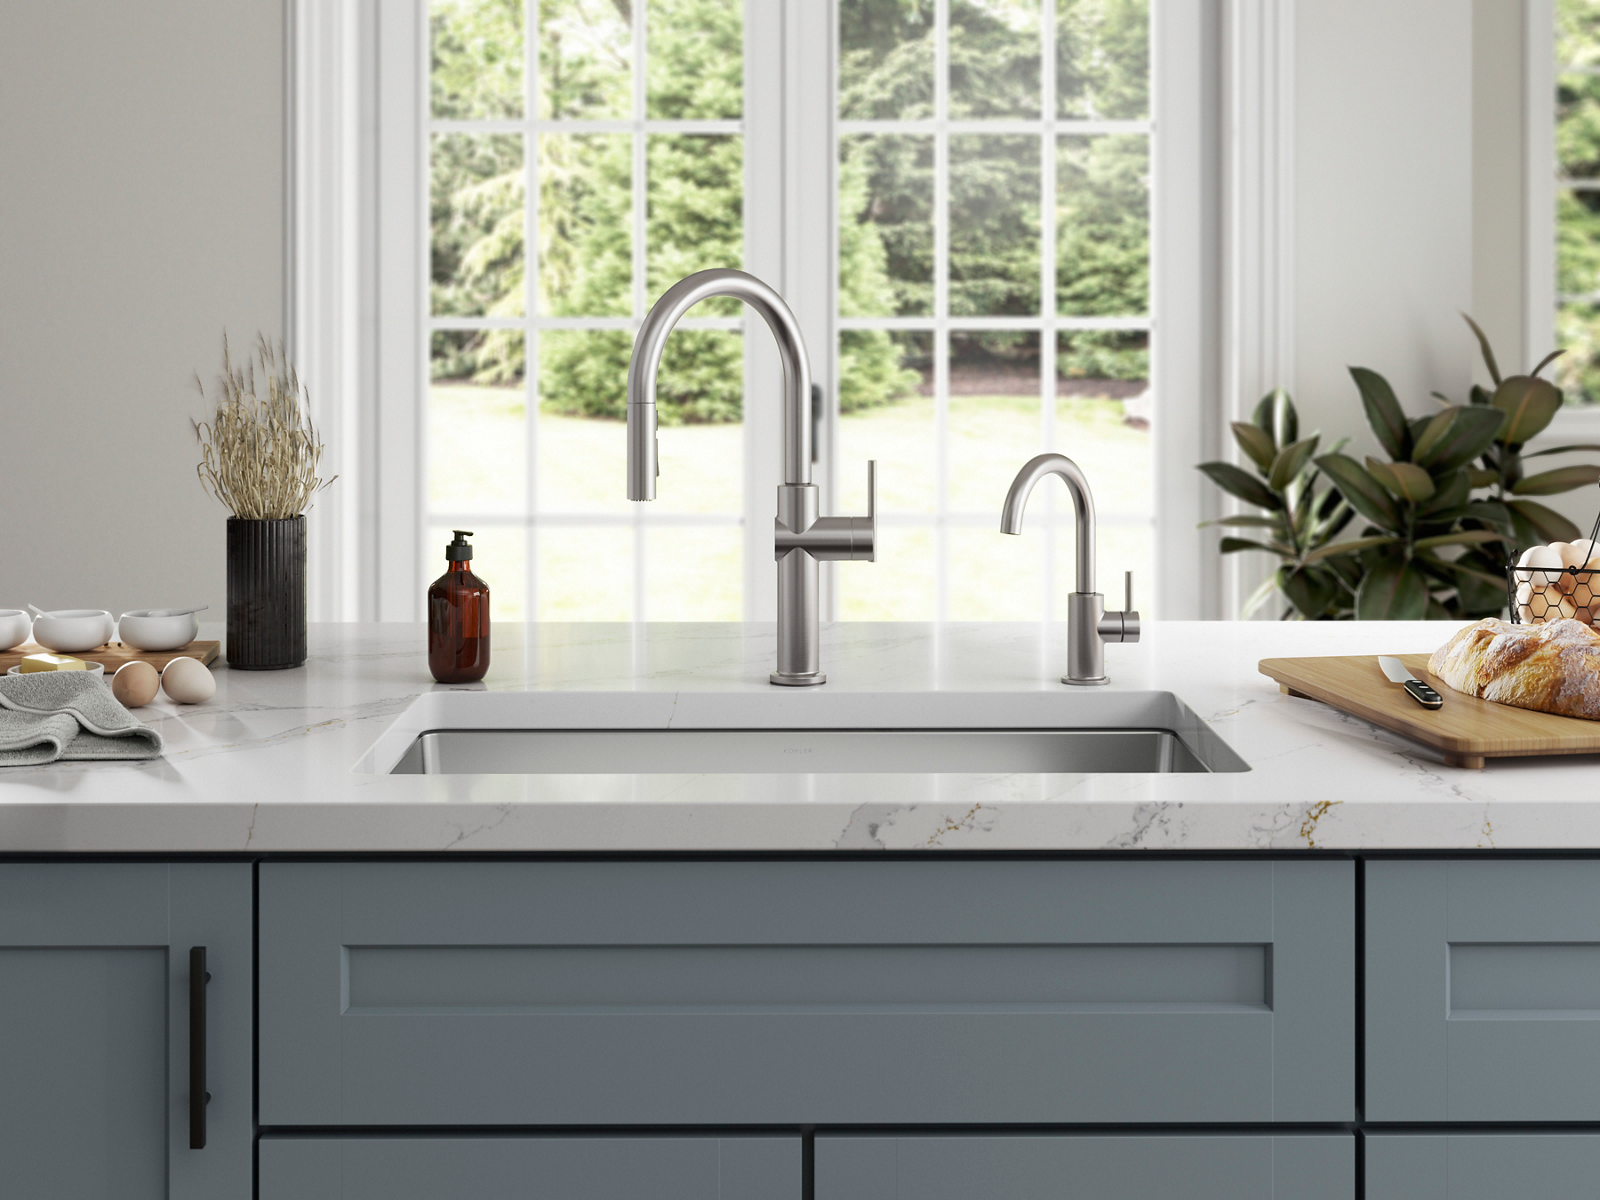 A close up shot of a sunny kitchen with a kitchen sink at center. The sink is attached to a white counter top and designed with a silver faucet with a silver water tap faucet.